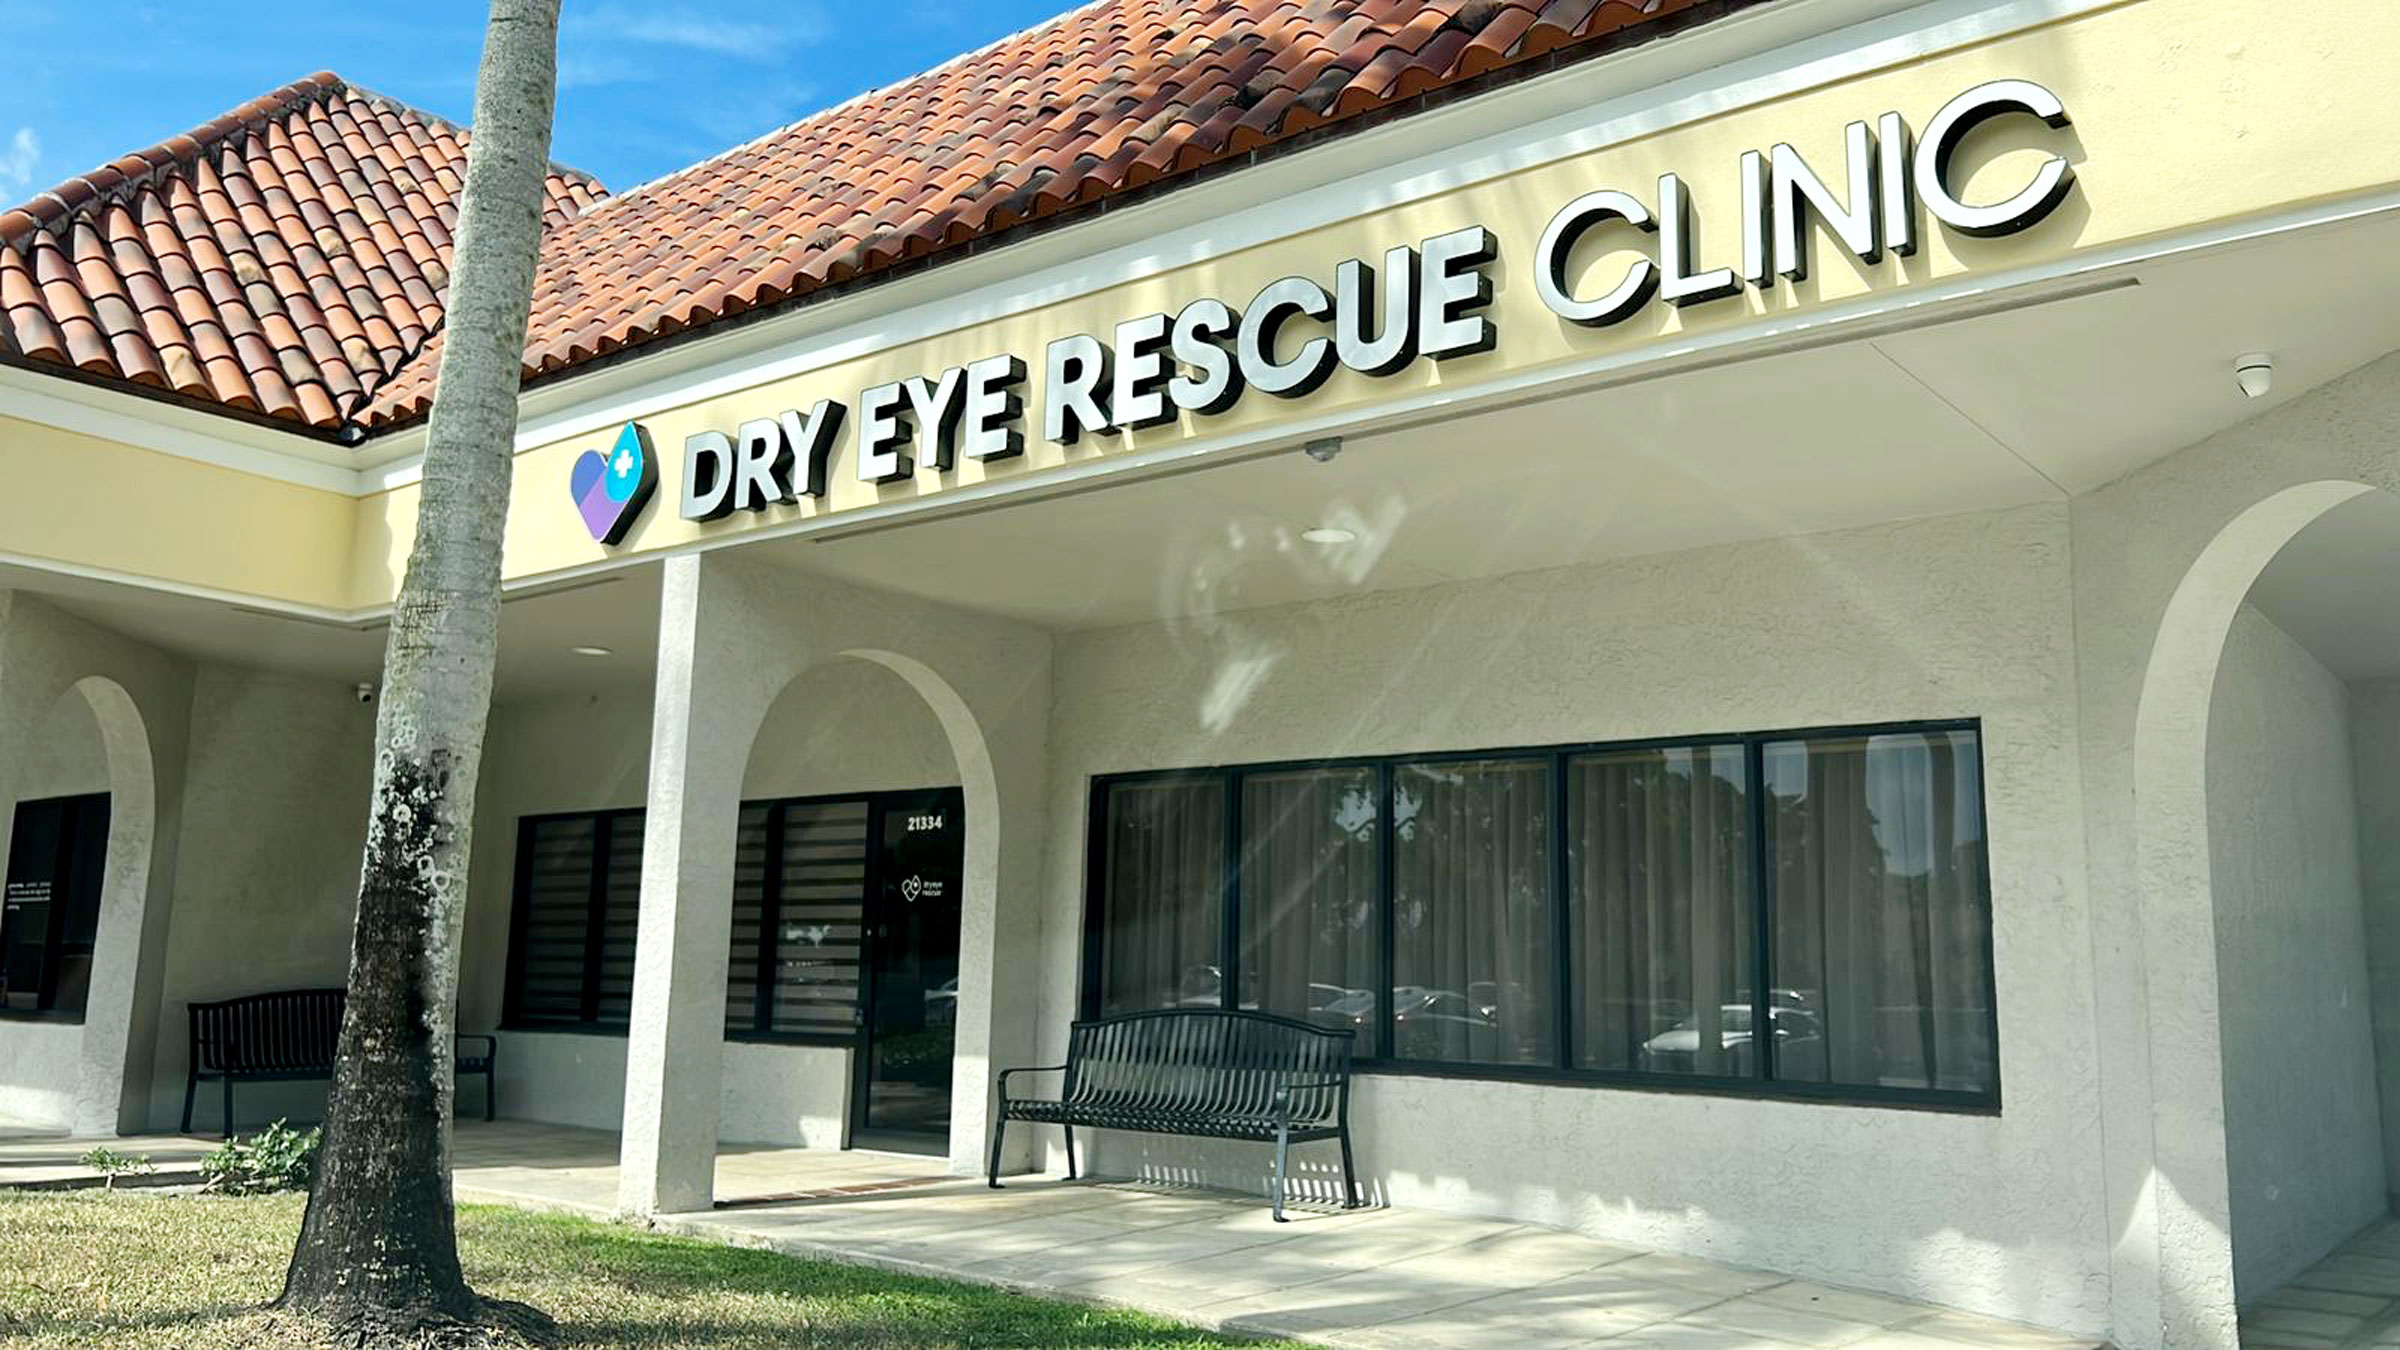 dry eye rescue clinic storefront